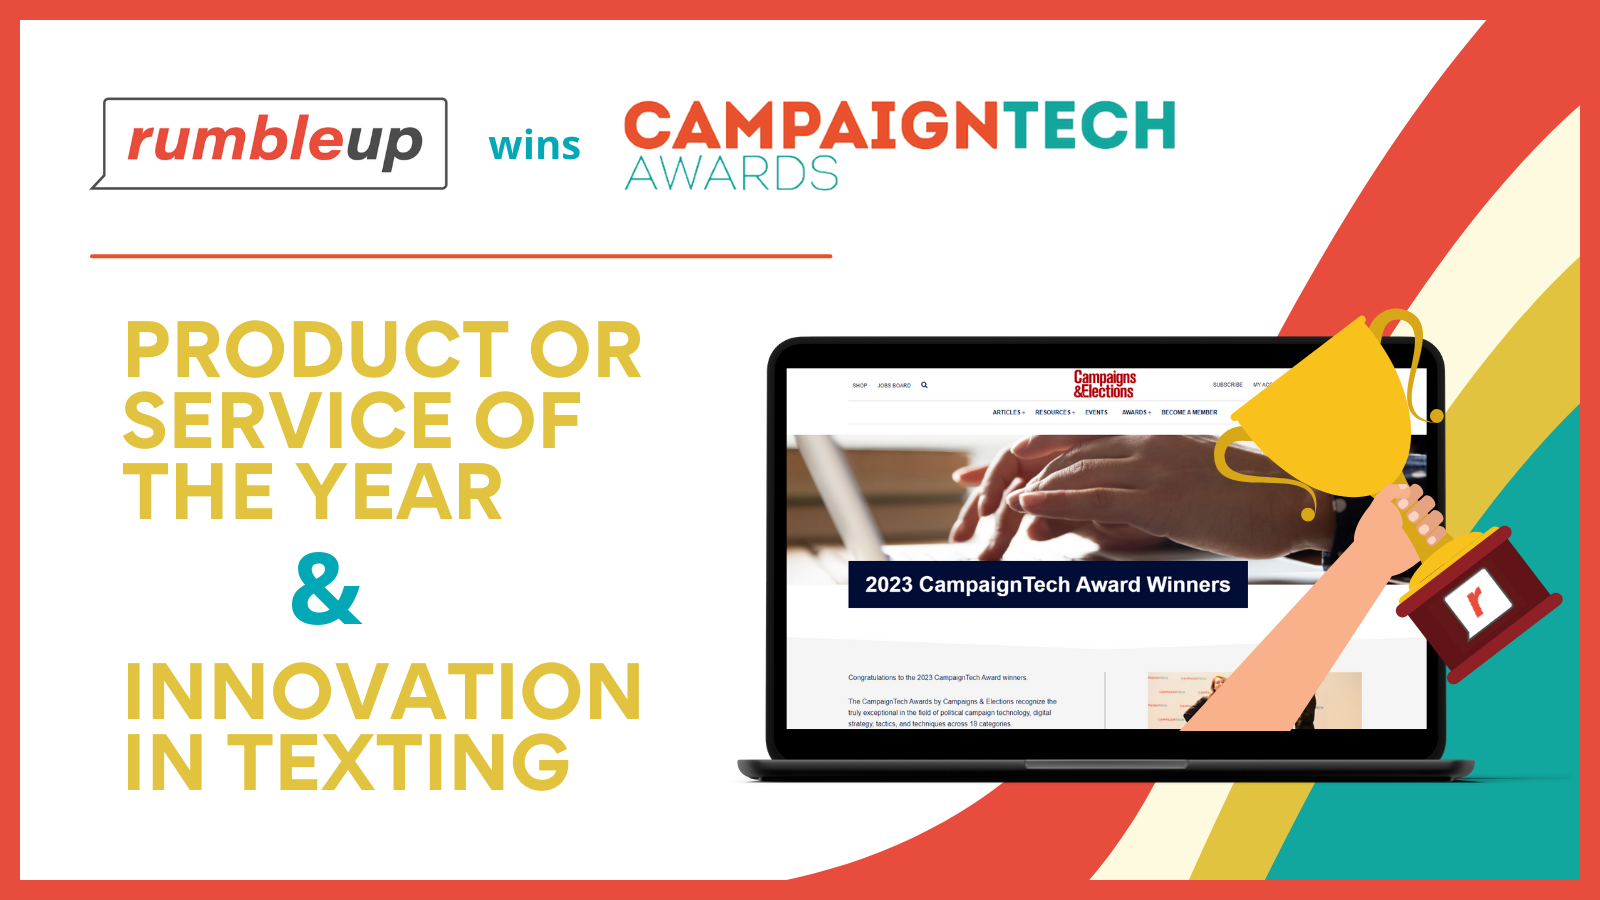 Why RumbleUp Won Product/Service of the Year and Innovation in Texting in the 2023 CampaignTech Awards